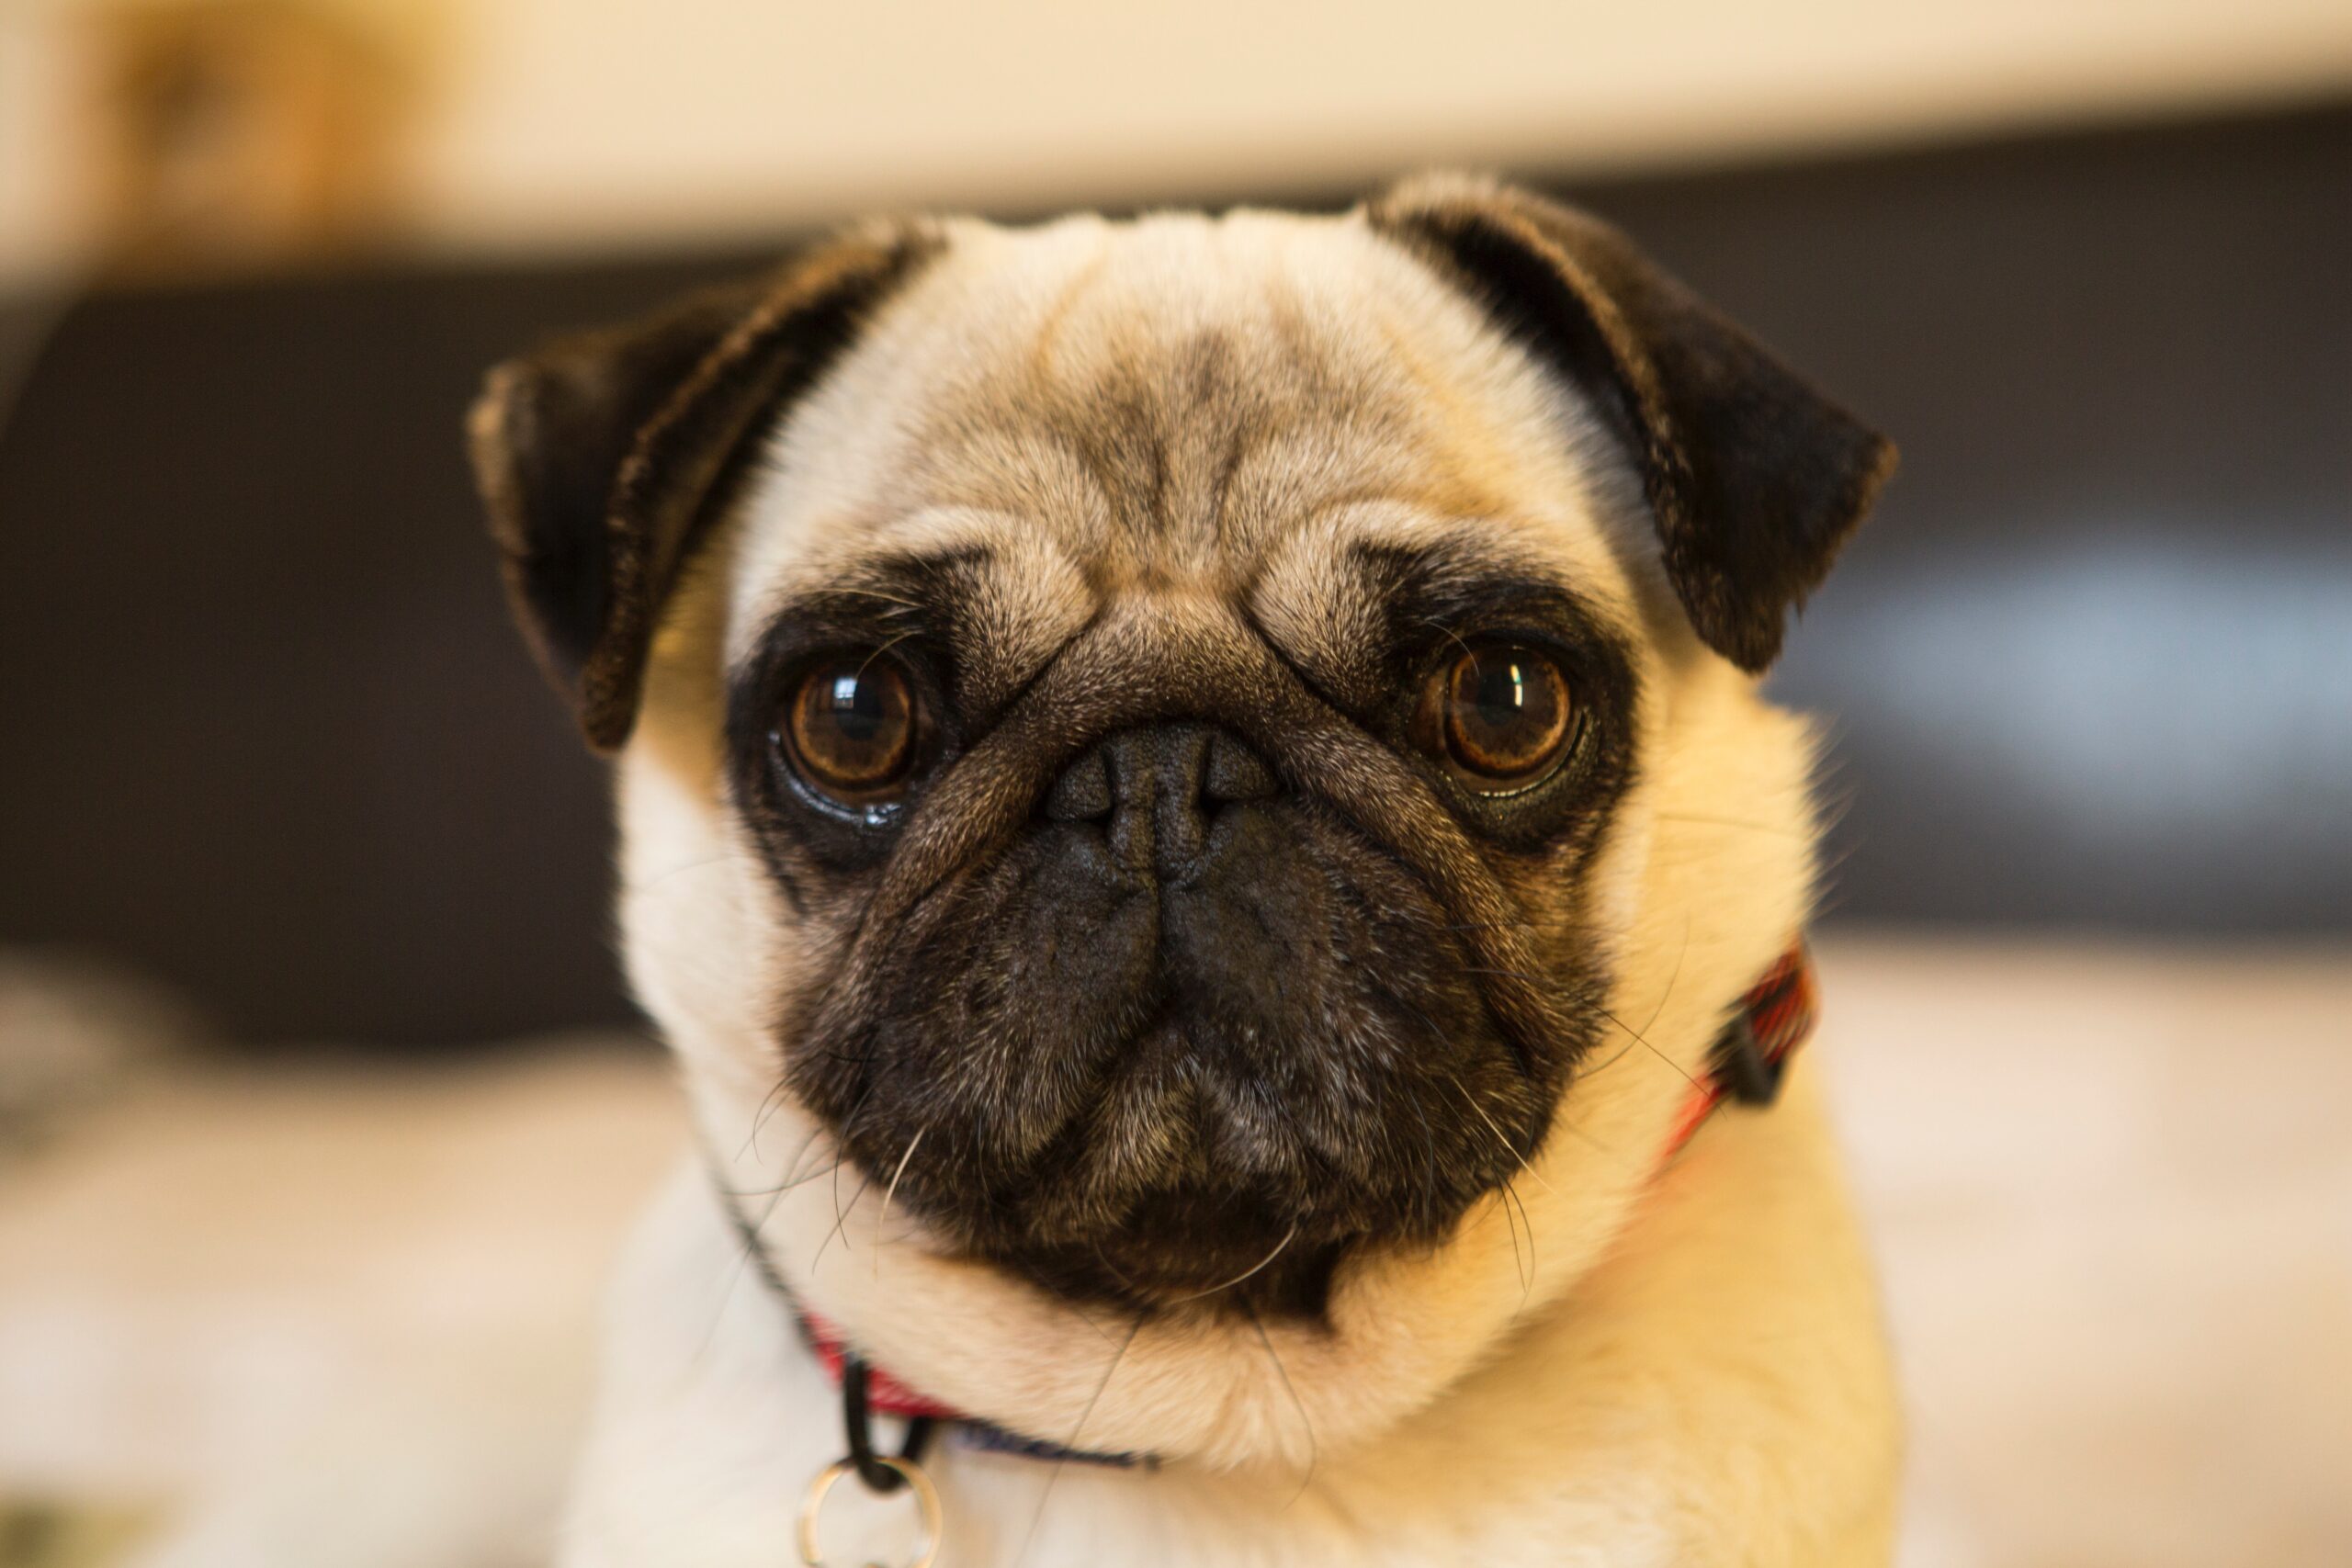 A close-up of a cheeky looking black and tan pug.